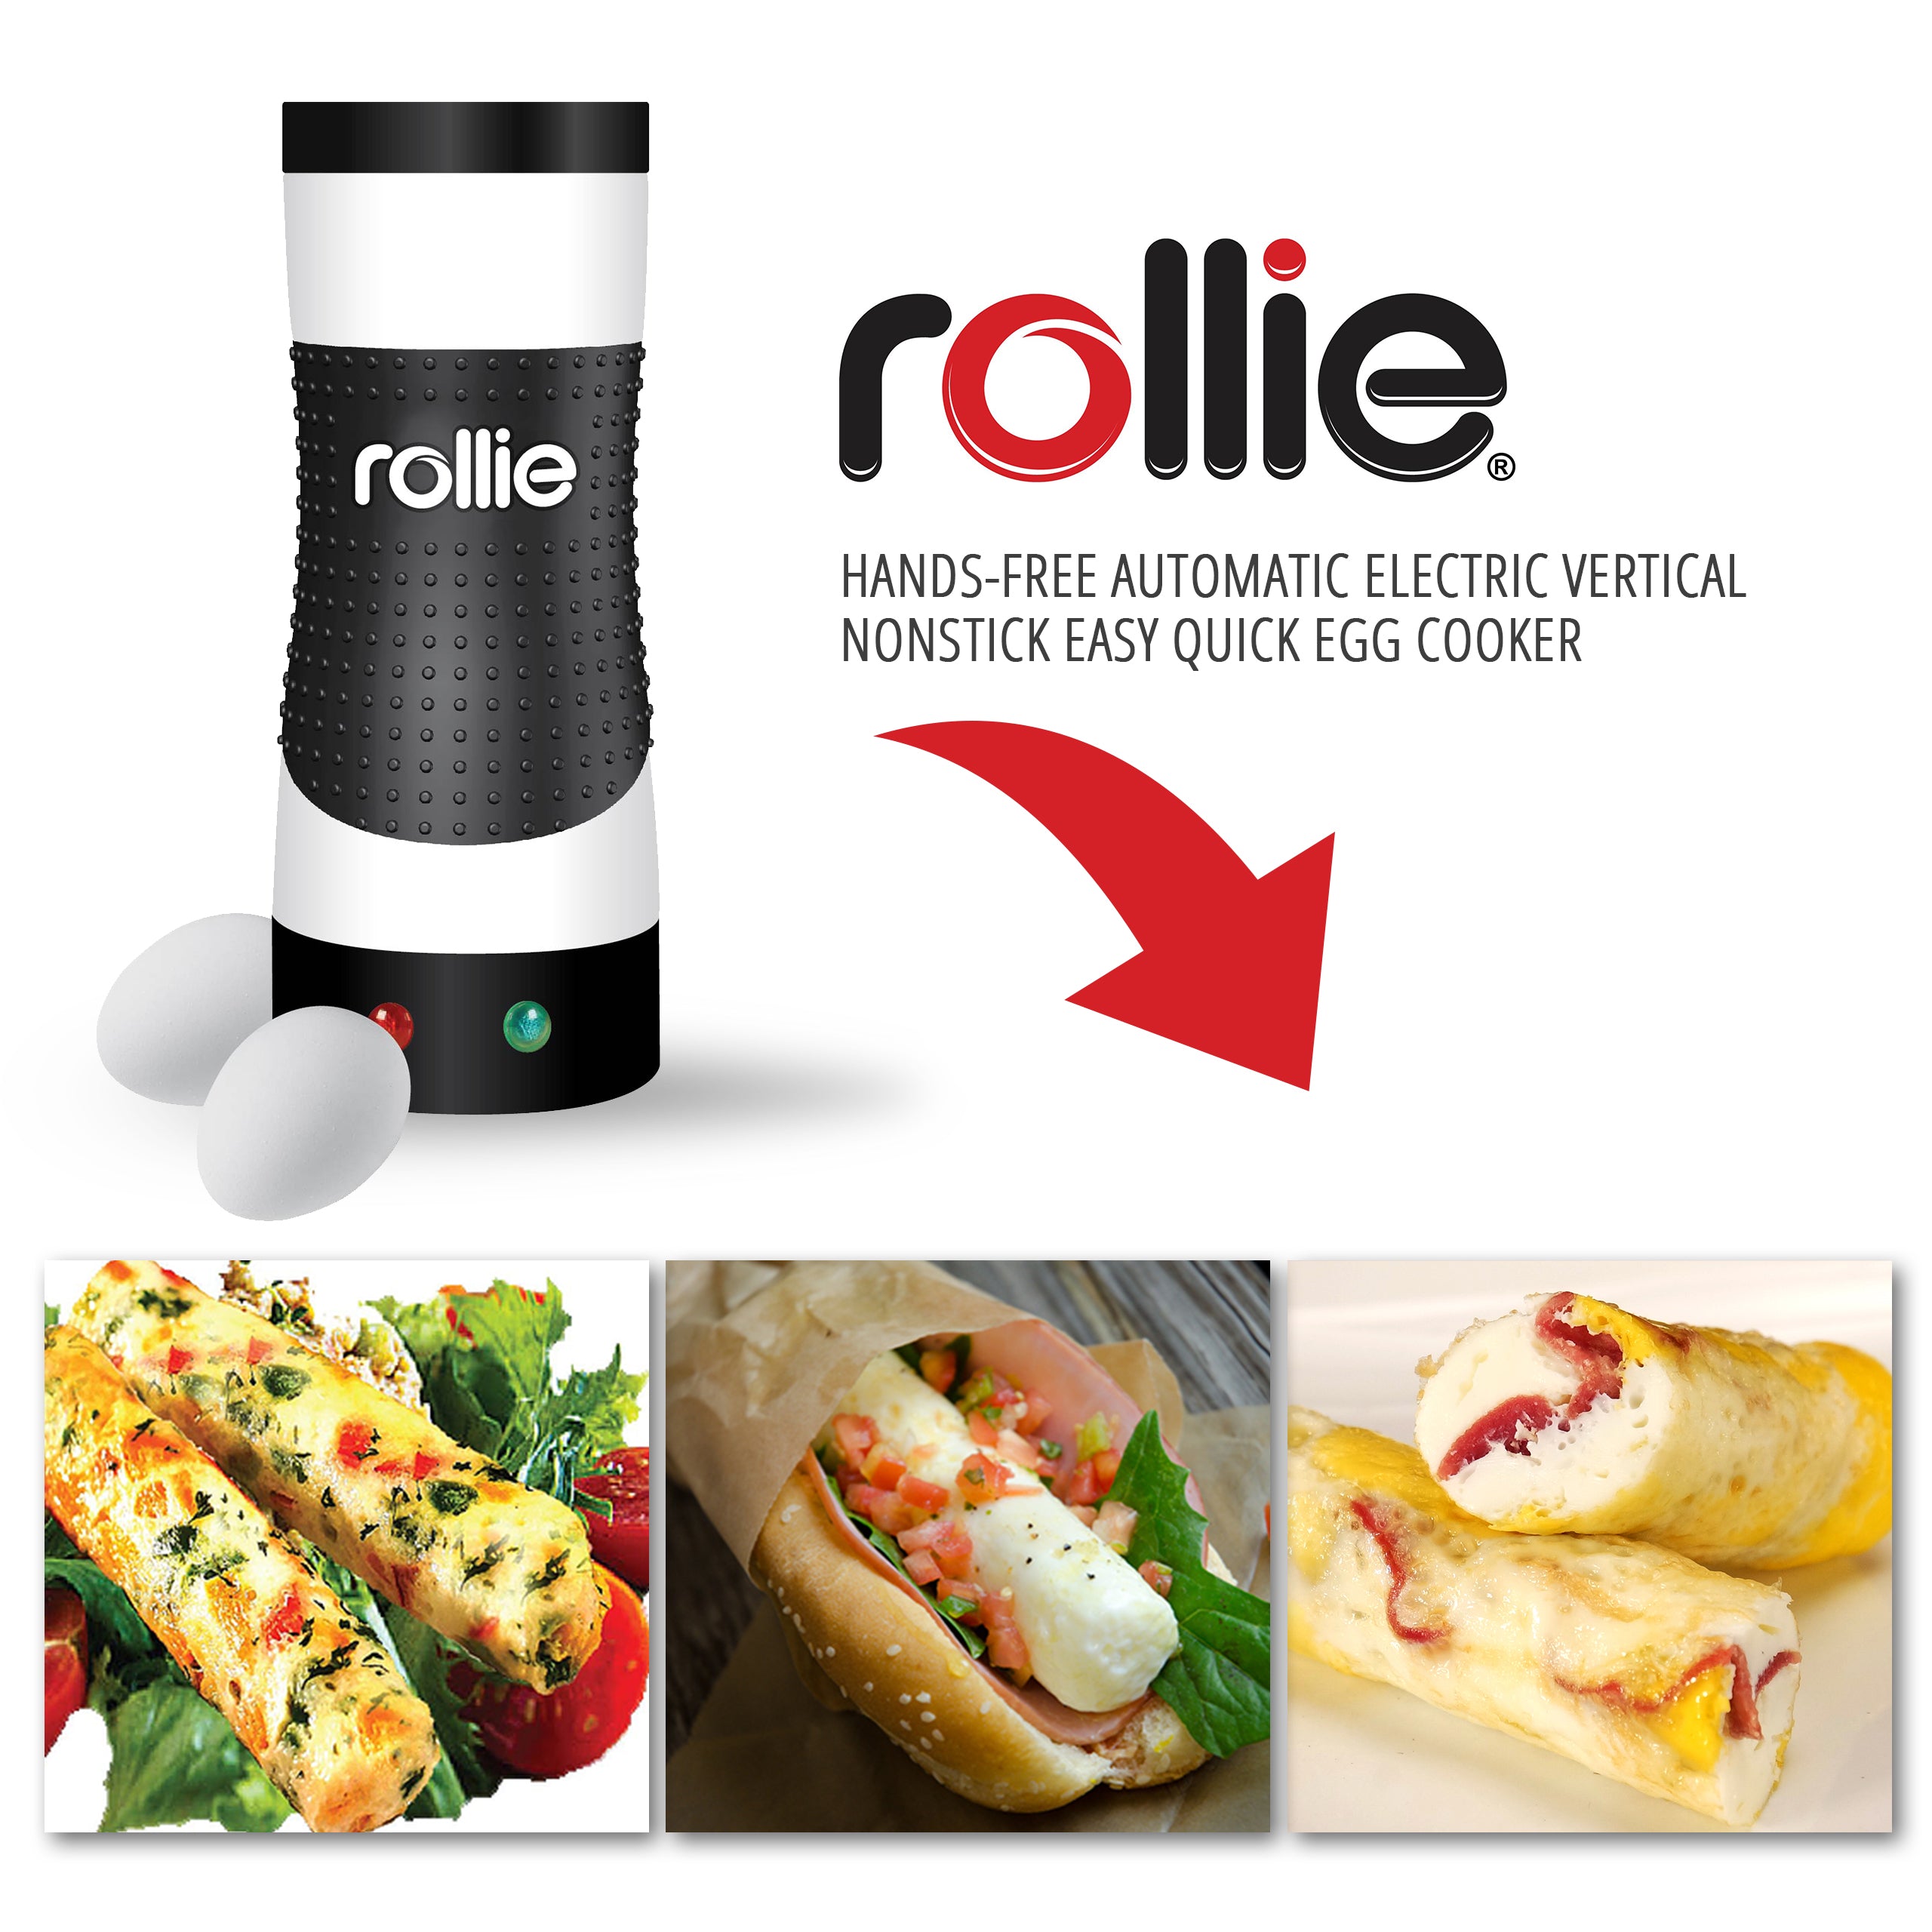 Rollie Egg Cooker. Hands-Free Automatic Electric fast and easy Egg Cooker